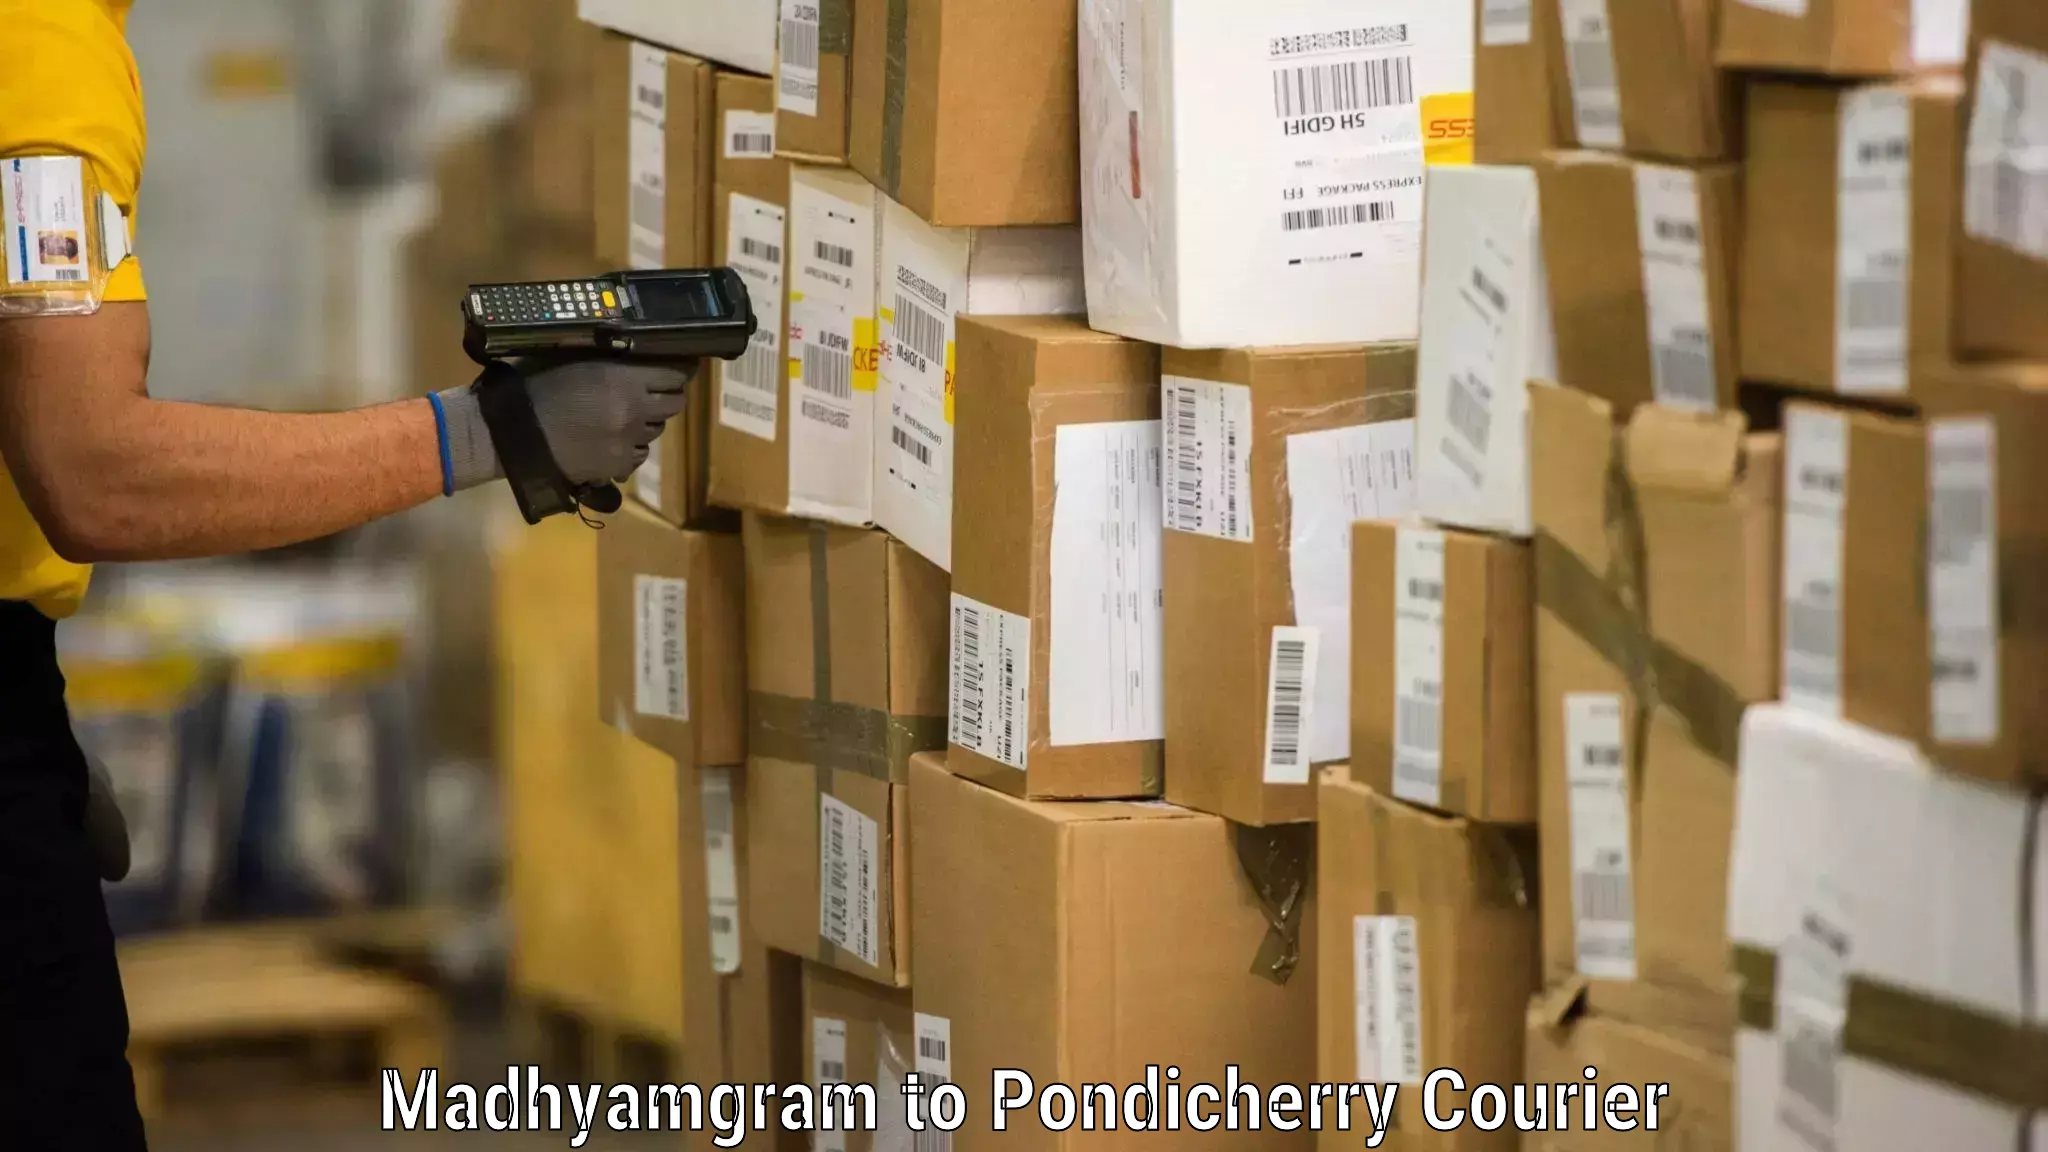 Moving and packing experts Madhyamgram to Pondicherry